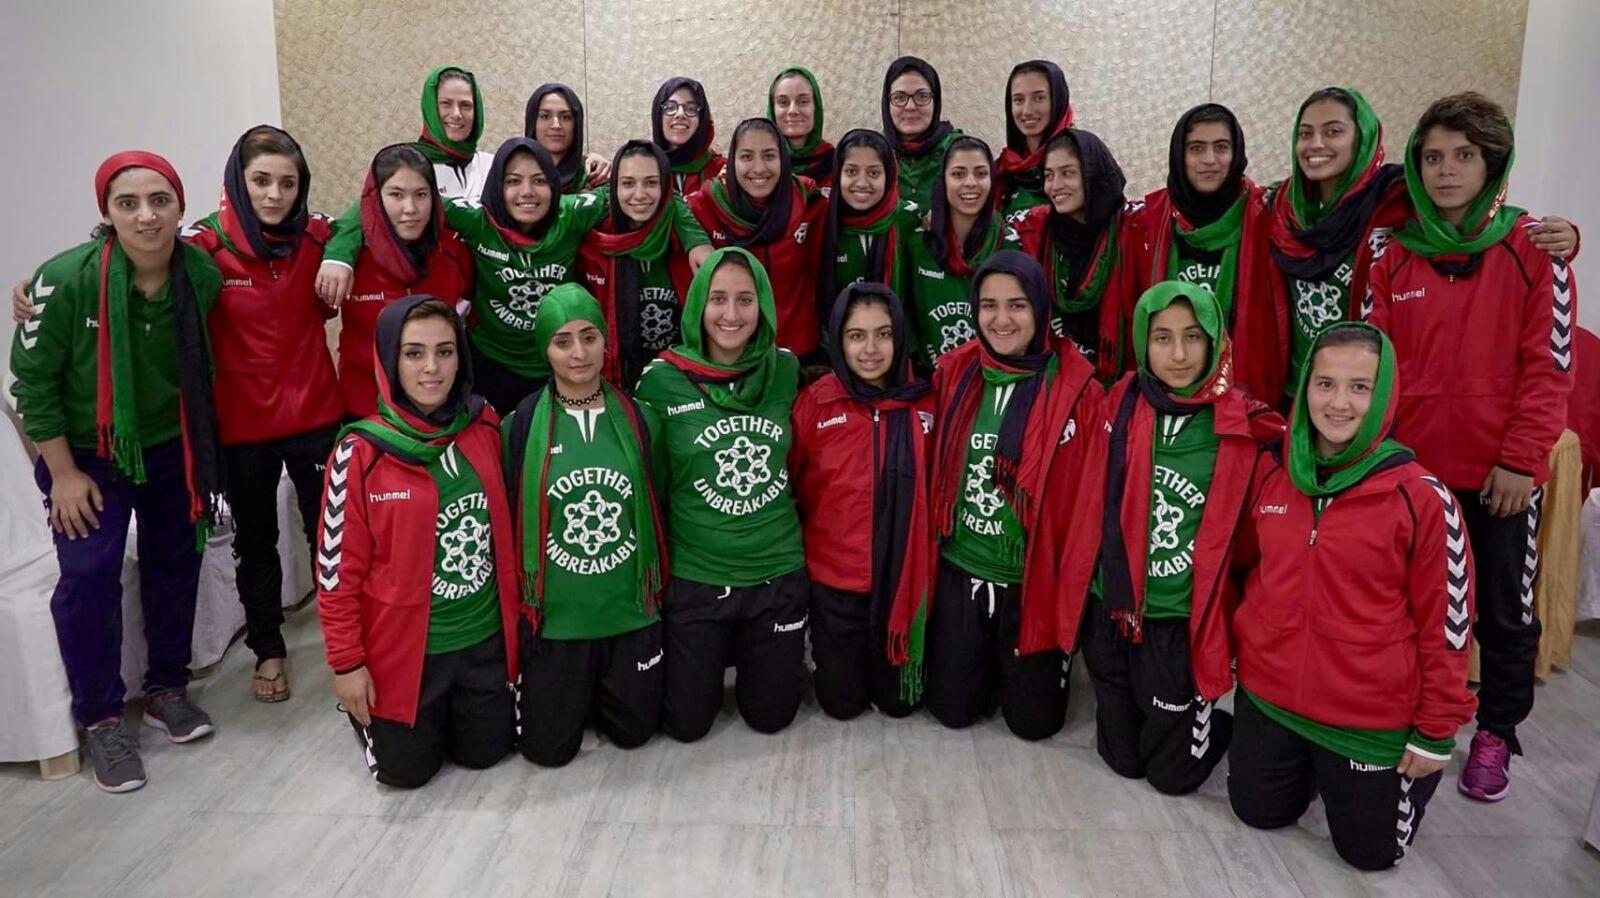 the Afghanistan Women's National soccer team poses in uniform